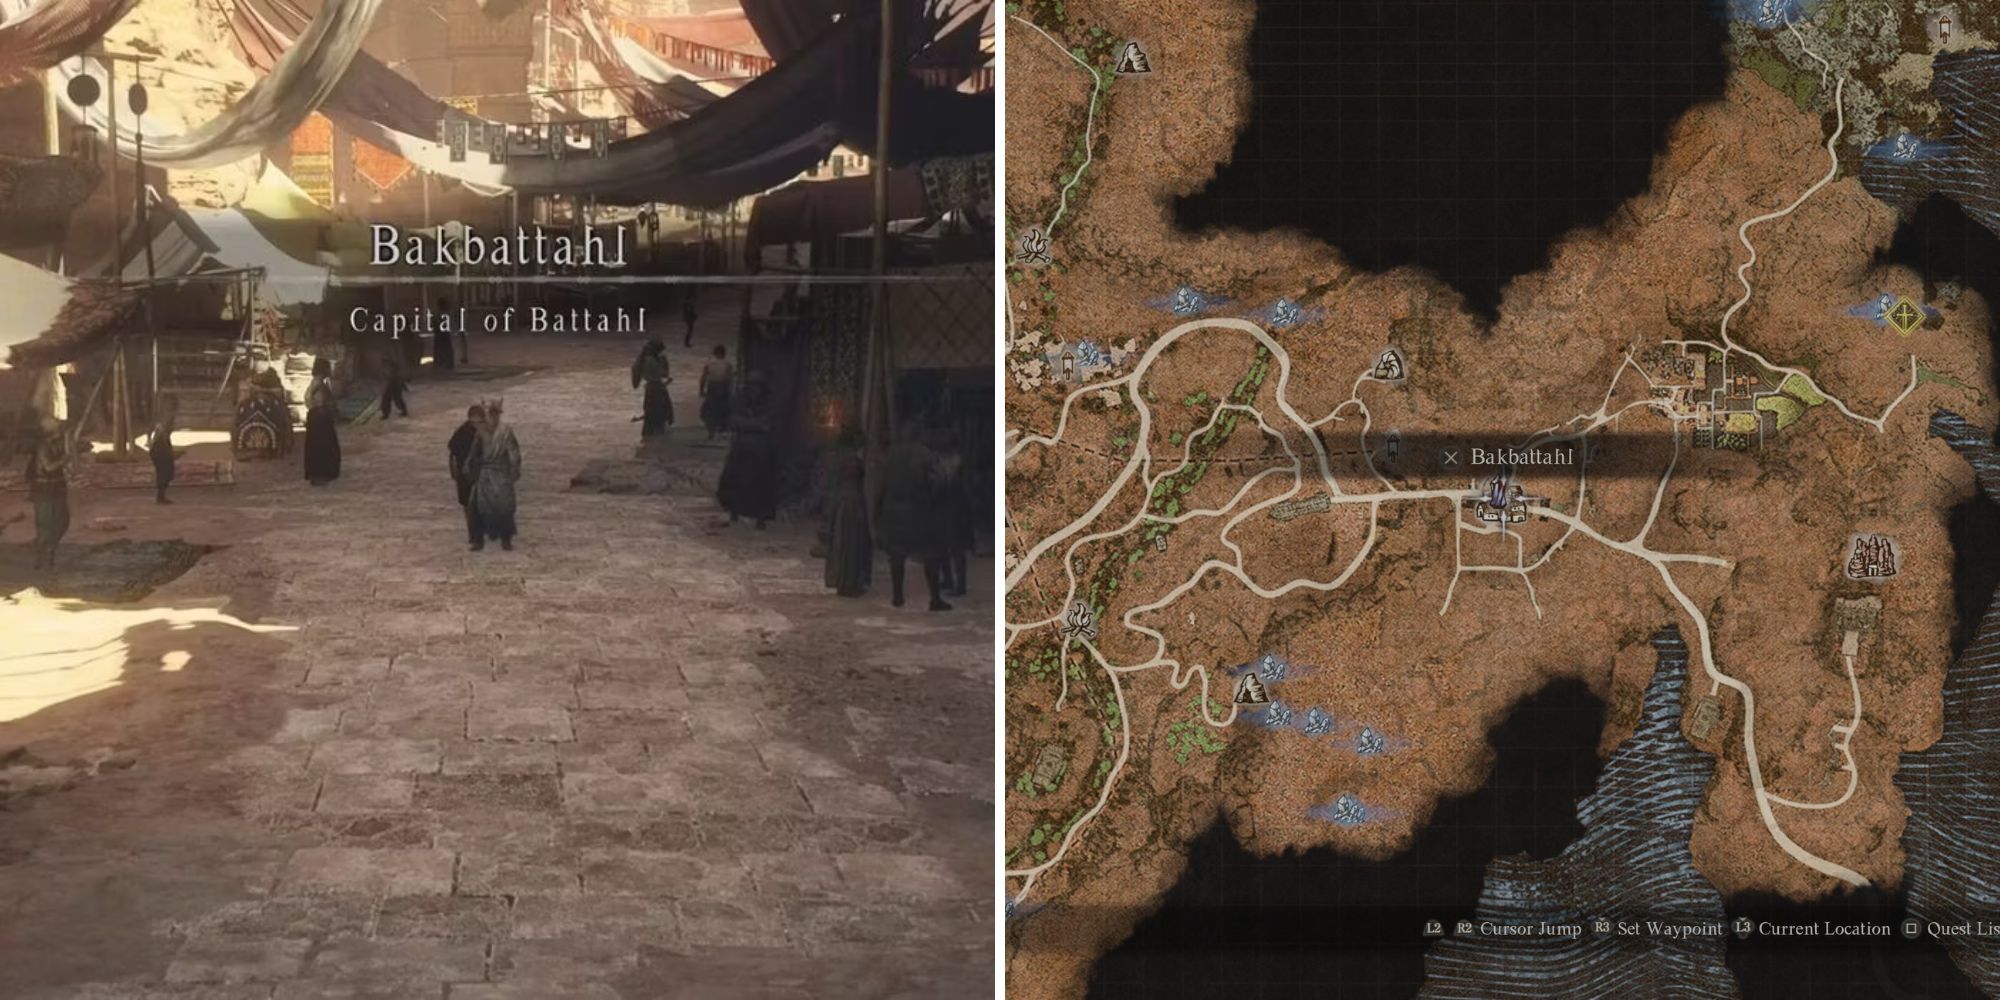 The Player Entering Bakbattahl & Its Location On The Map 